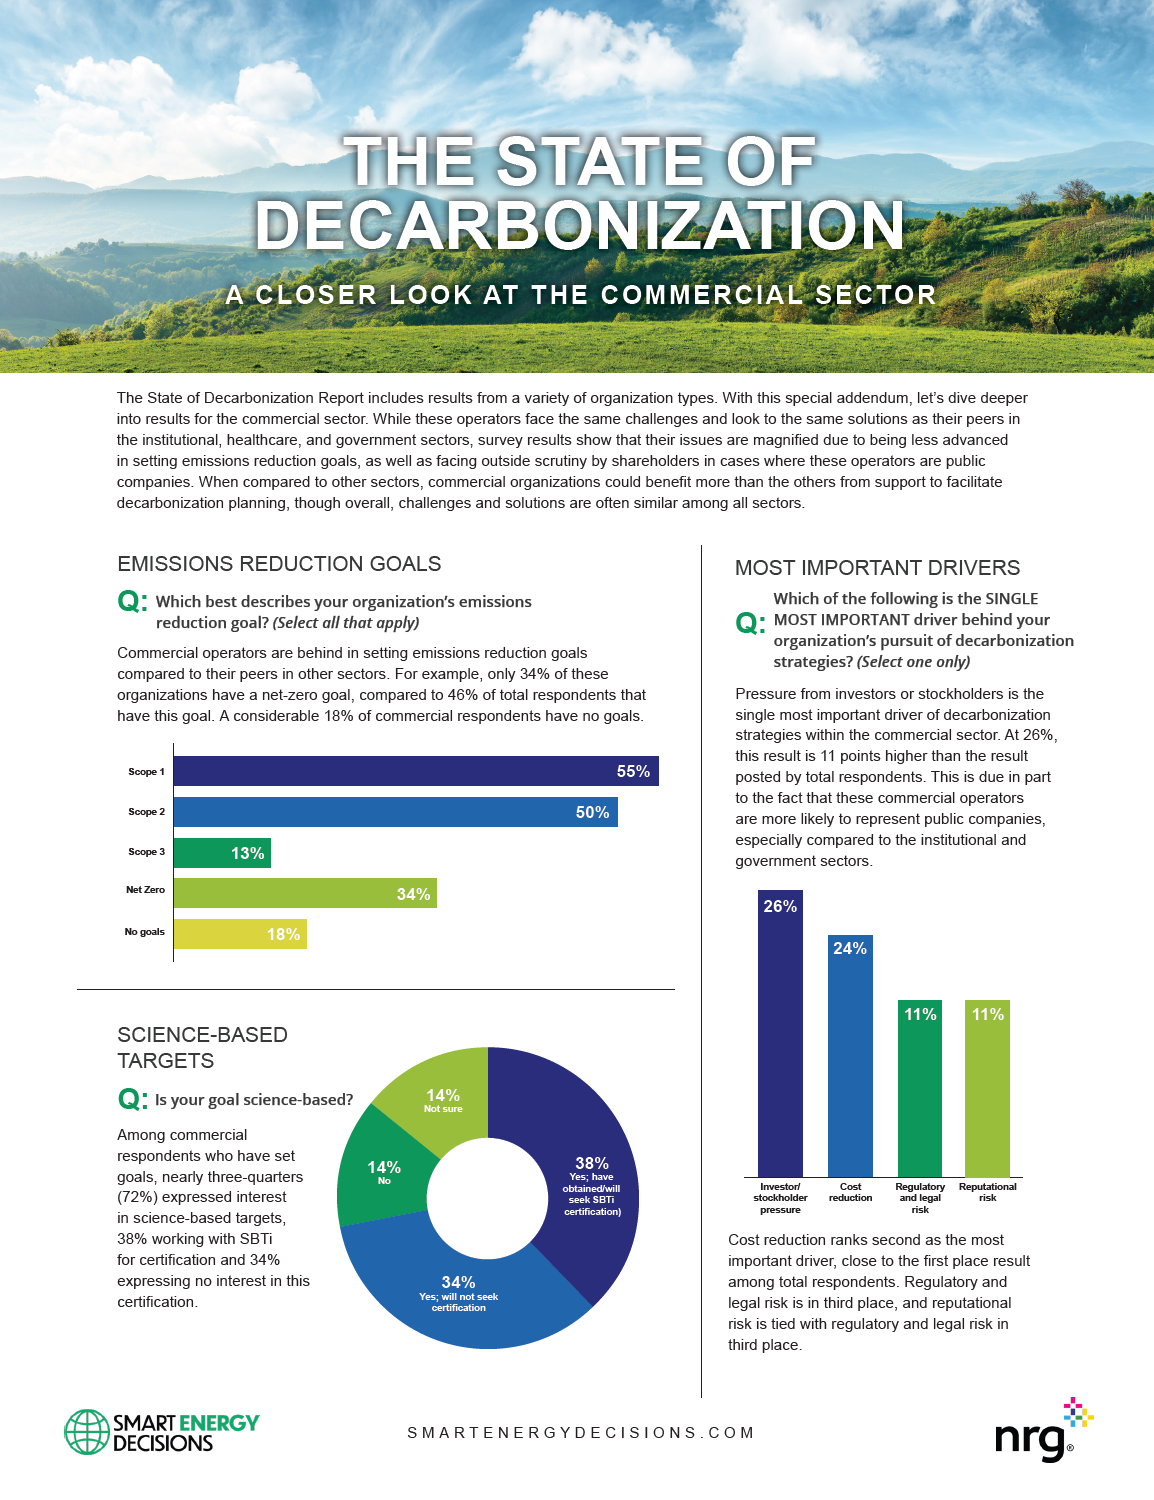 The State of Decarbonization: A Closer Look at the Commercial Sector